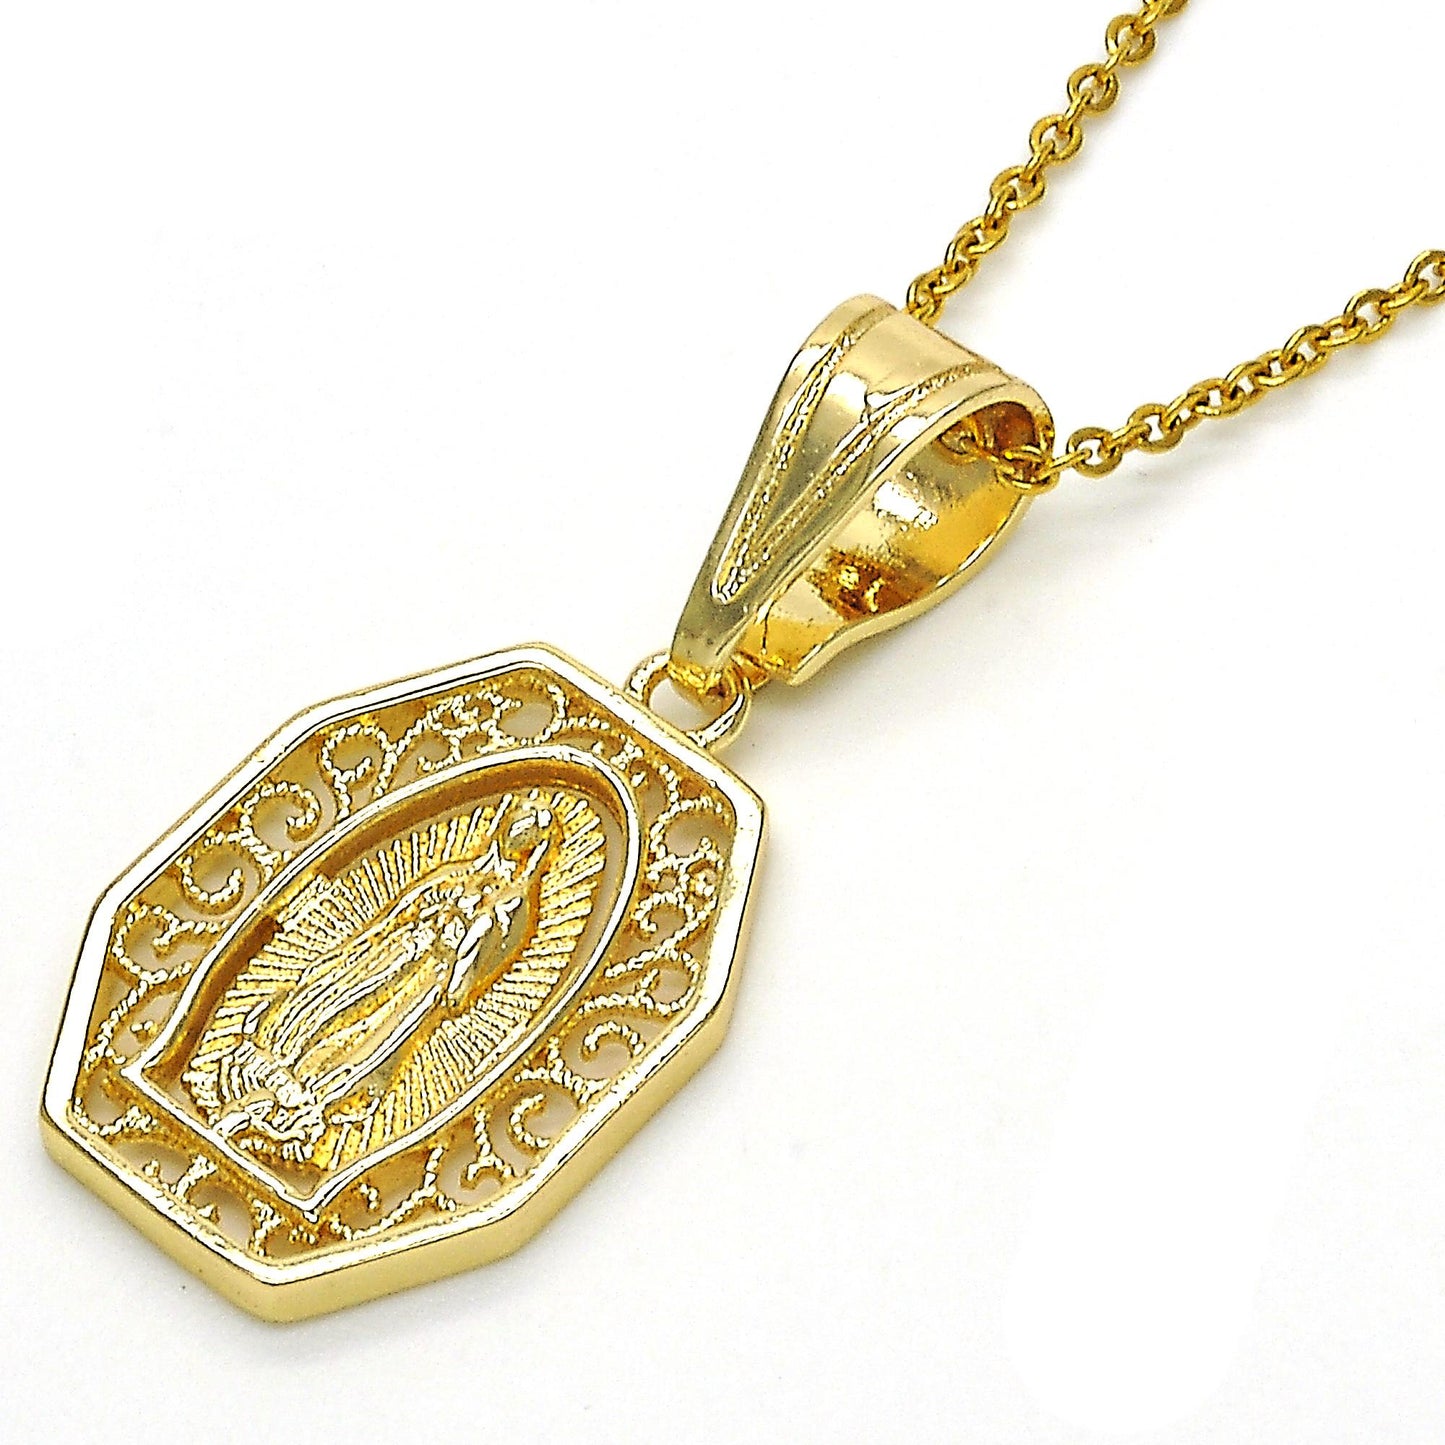 Polished 14k Yellow Gold Plated Type Type Type Pendant, 36mm x 16.5mm (⅖ inches' x ⅔ inches') (SKU: GL-PD1012)